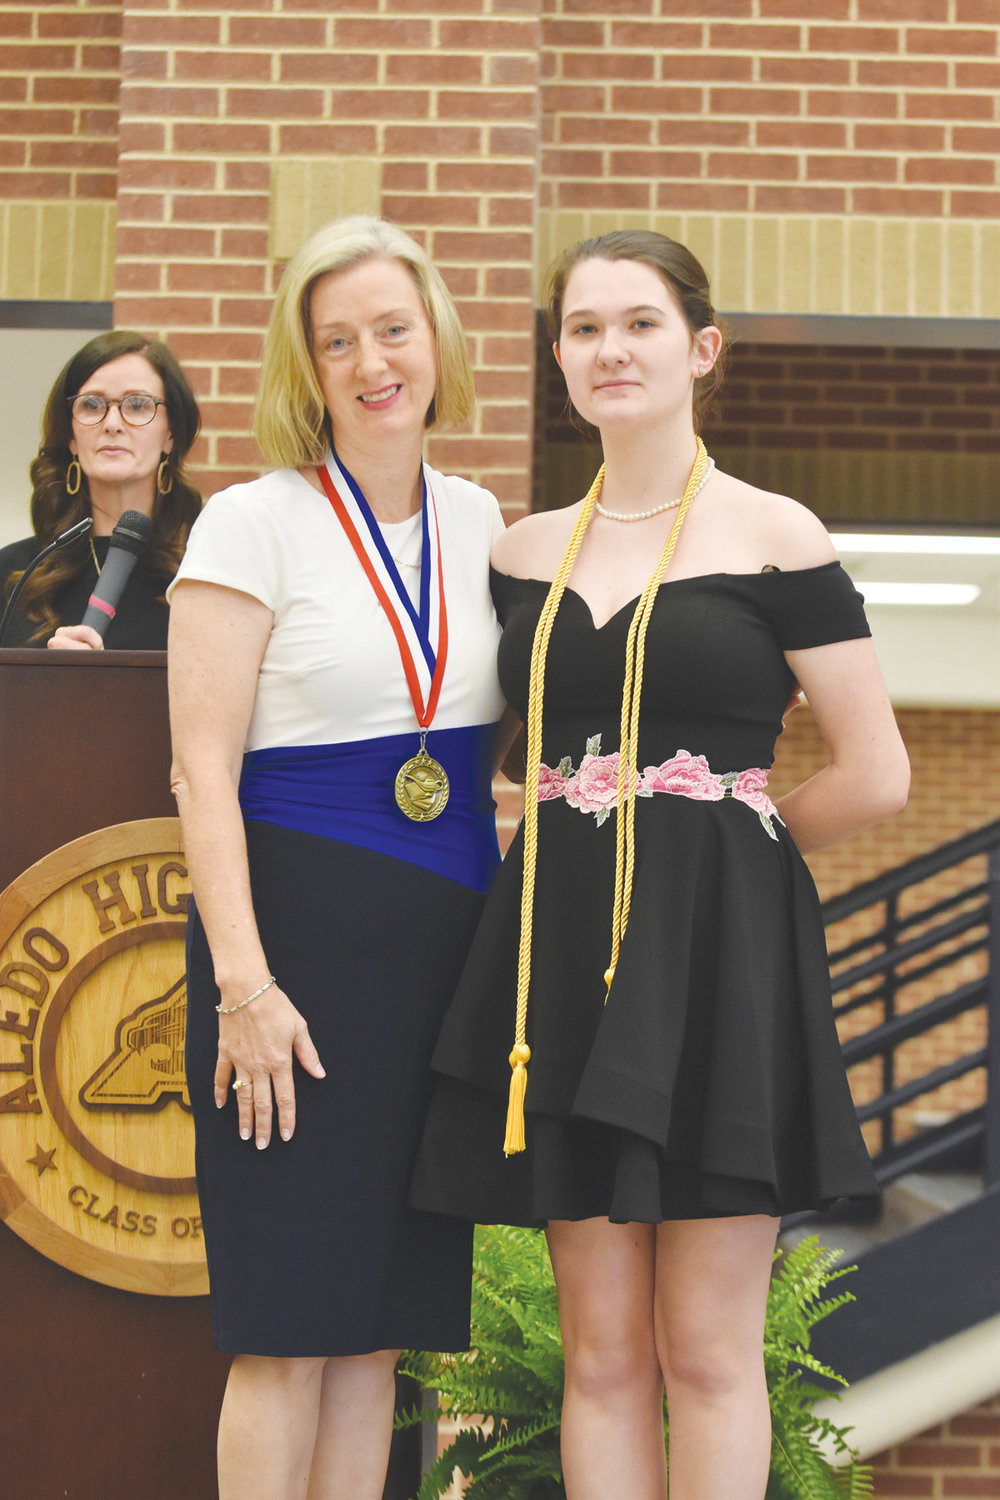 Taylor Hobbs is the daughter of Michelle Preston and David Hobbs. She plans to attend Embry-Riddle Aeronautical University and become a software engineer. She honored Mrs. Julia Reynolds.